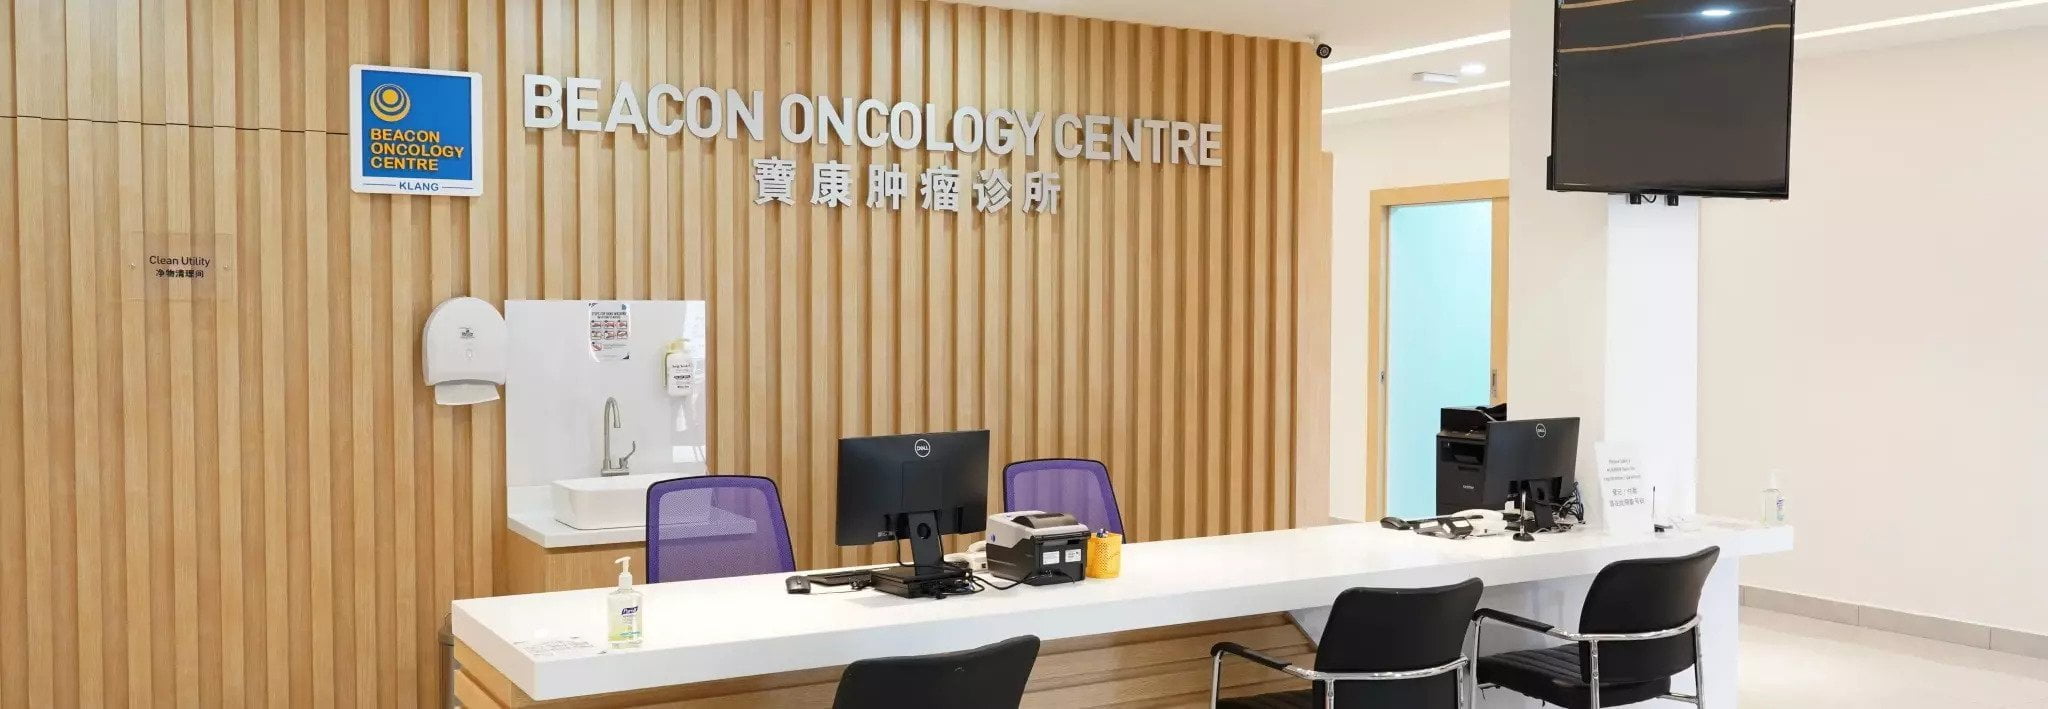 beacon-oncology-centre-klang